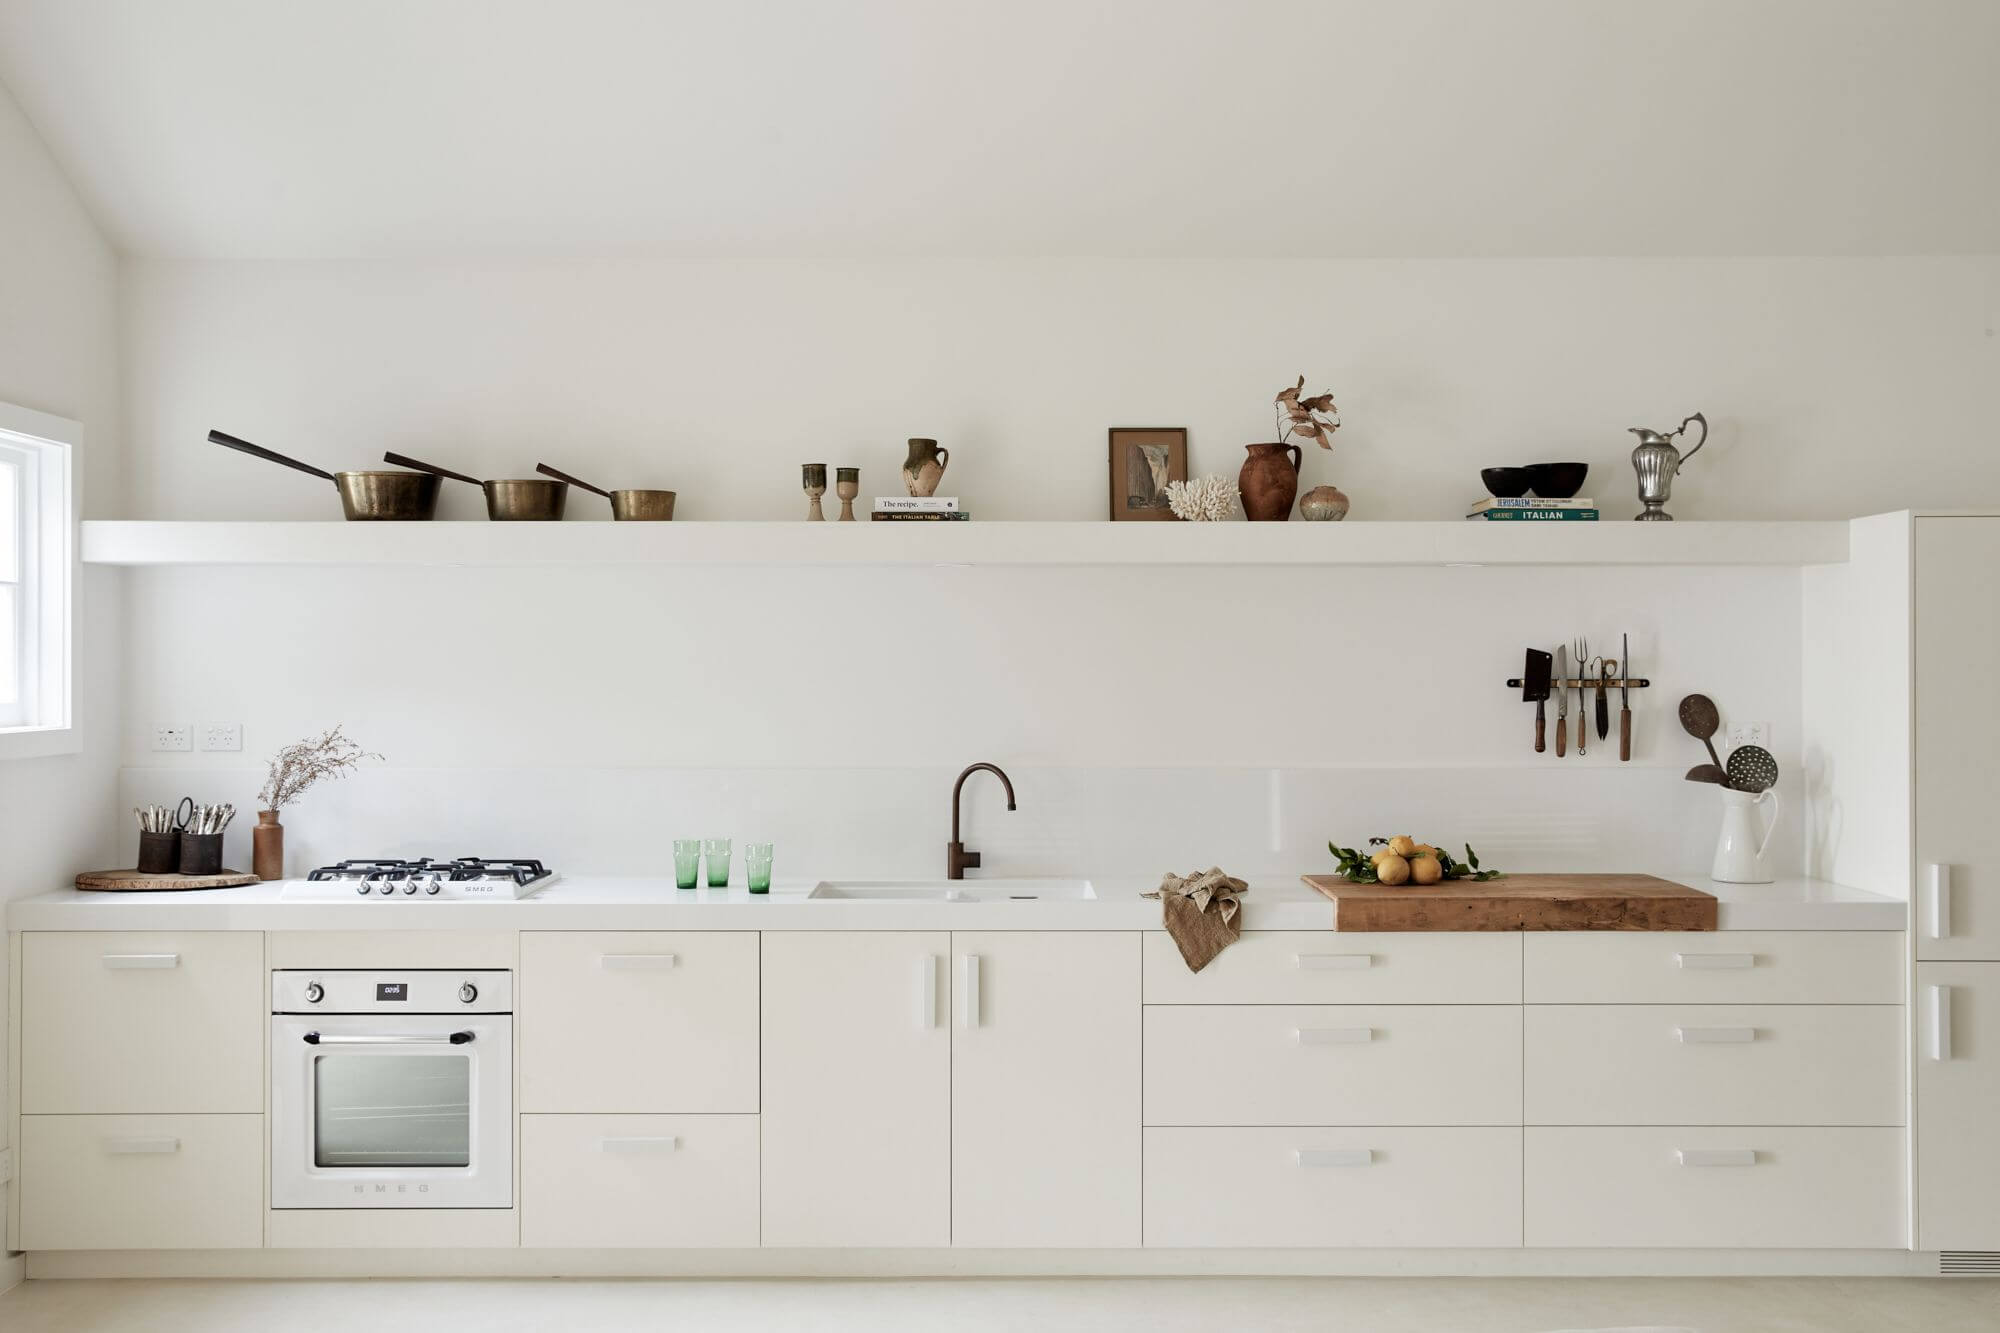 Le Viti Barn Newrybar: Off-white single-line kitchen with open shelves and an ecelctic mix of decor on display